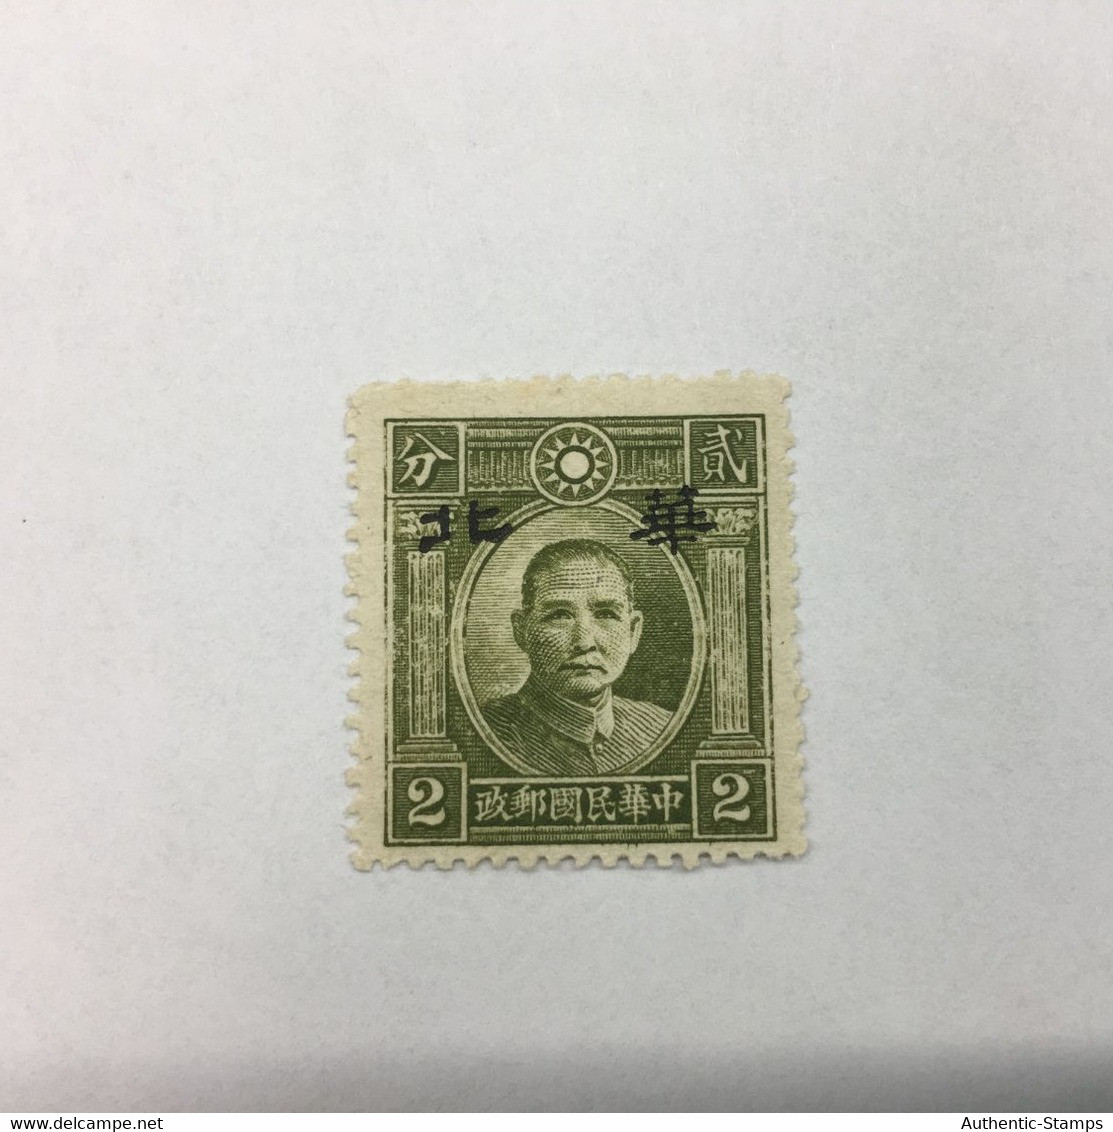 CHINA STAMP, UNUSED, TIMBRO, STEMPEL, CINA, CHINE, LIST 5809 - 1941-45 Cina Del Nord